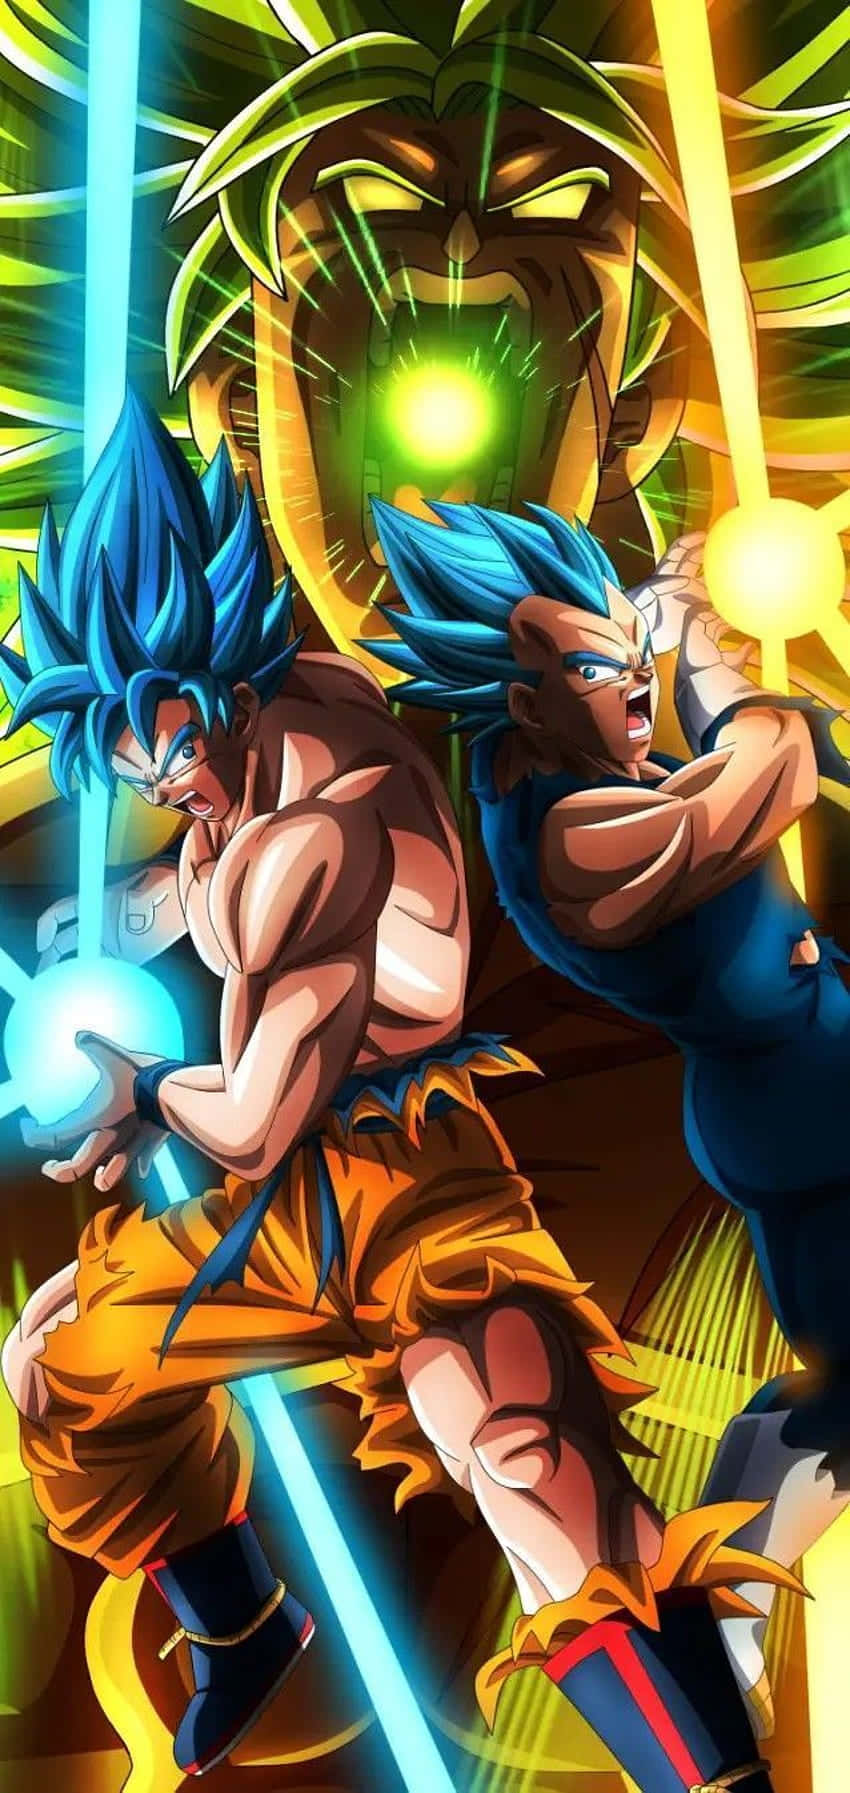 Goku and Vegeta, the most iconic duo of the Dragon Ball universe, stand side by side ready for battle. Wallpaper